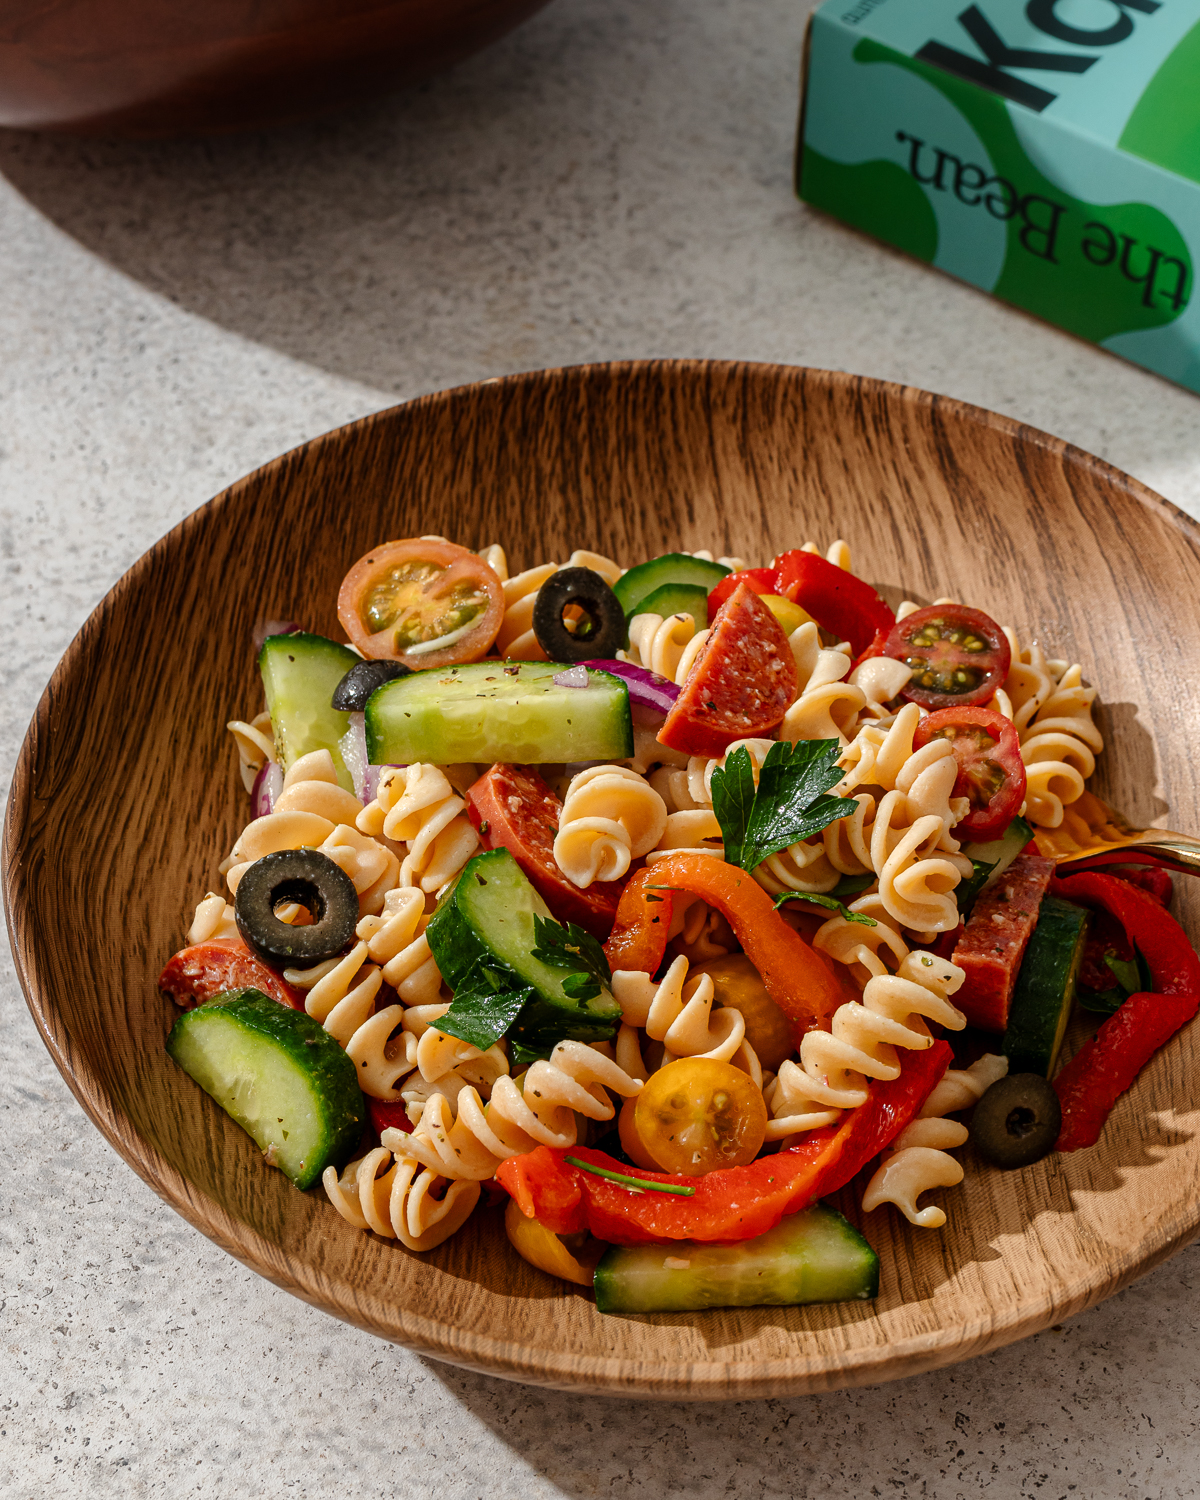 A serving of high protein pasta salad in a wooden bowl over a grape marble surface.